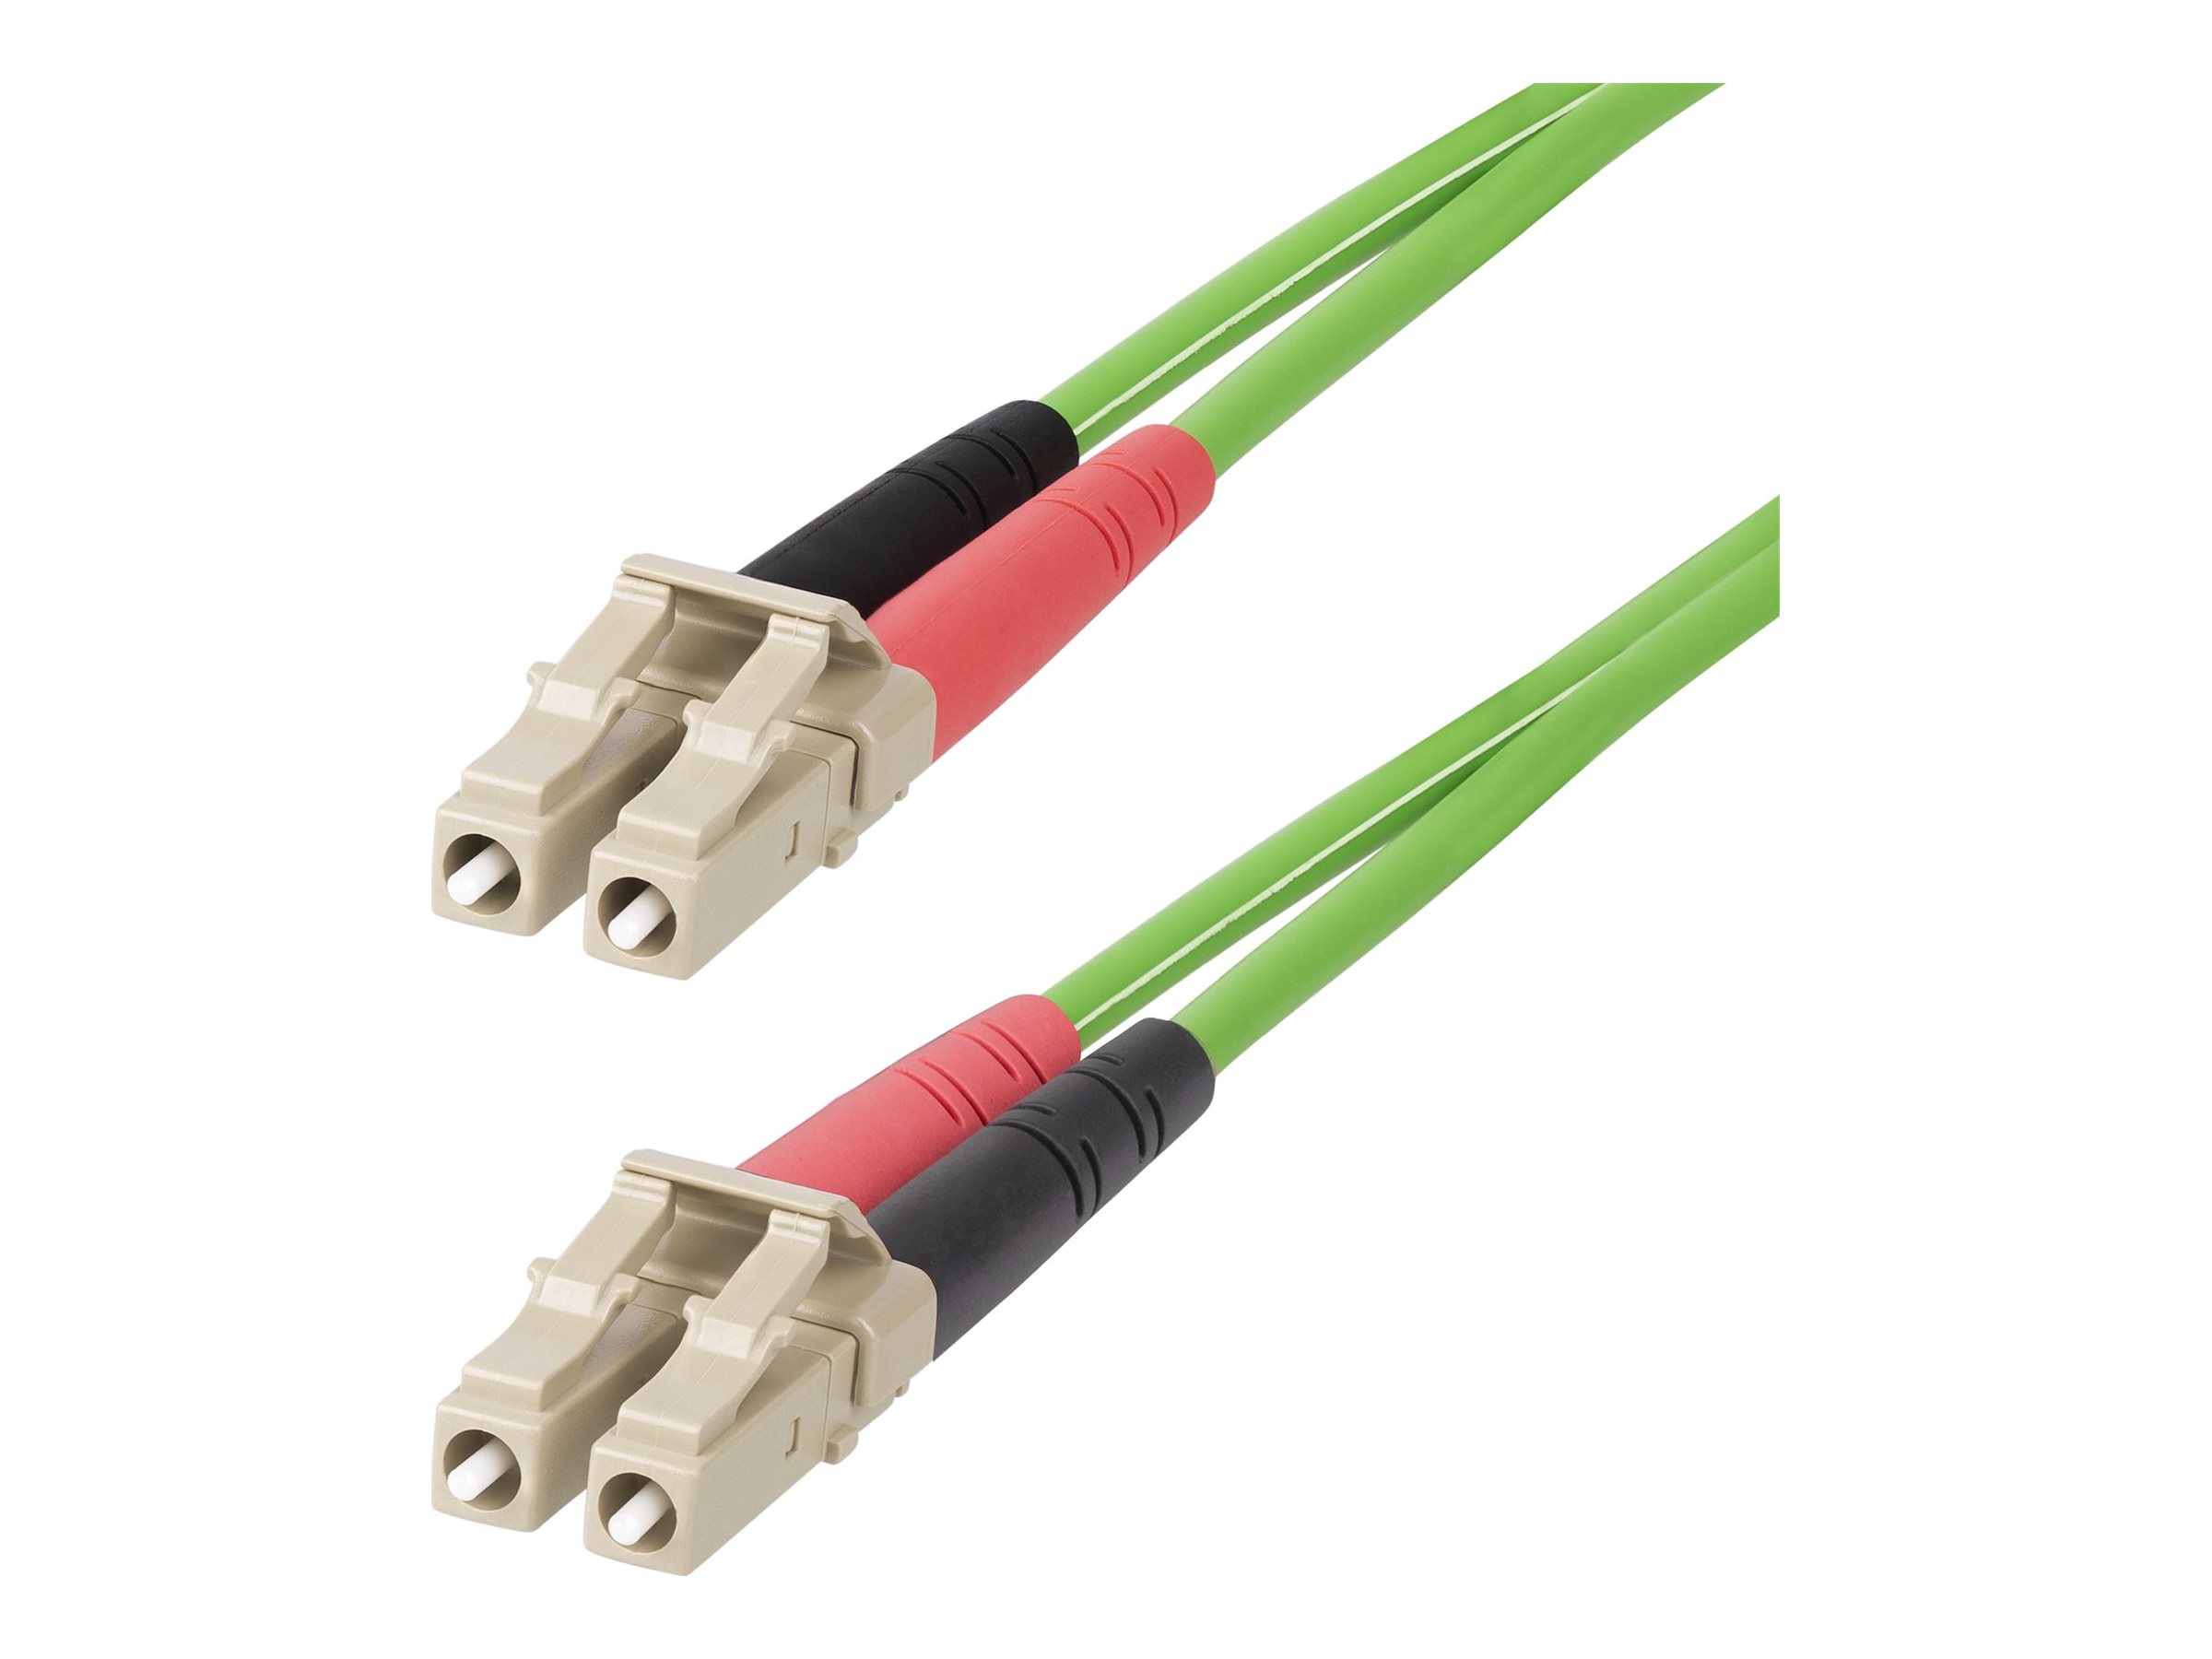 LSZH　Insertion　15m　Insensitive,　(UPC)　Fiber　(50ft)　Fiber　LC　Multimode　Zipcord,　to　LOMMF　Low　LC　Duplex　OM5　Optic　Cable,　Cord　50/125#xB5;m　VCSEL,　40G/100G,　Bend　Loss,　Patch